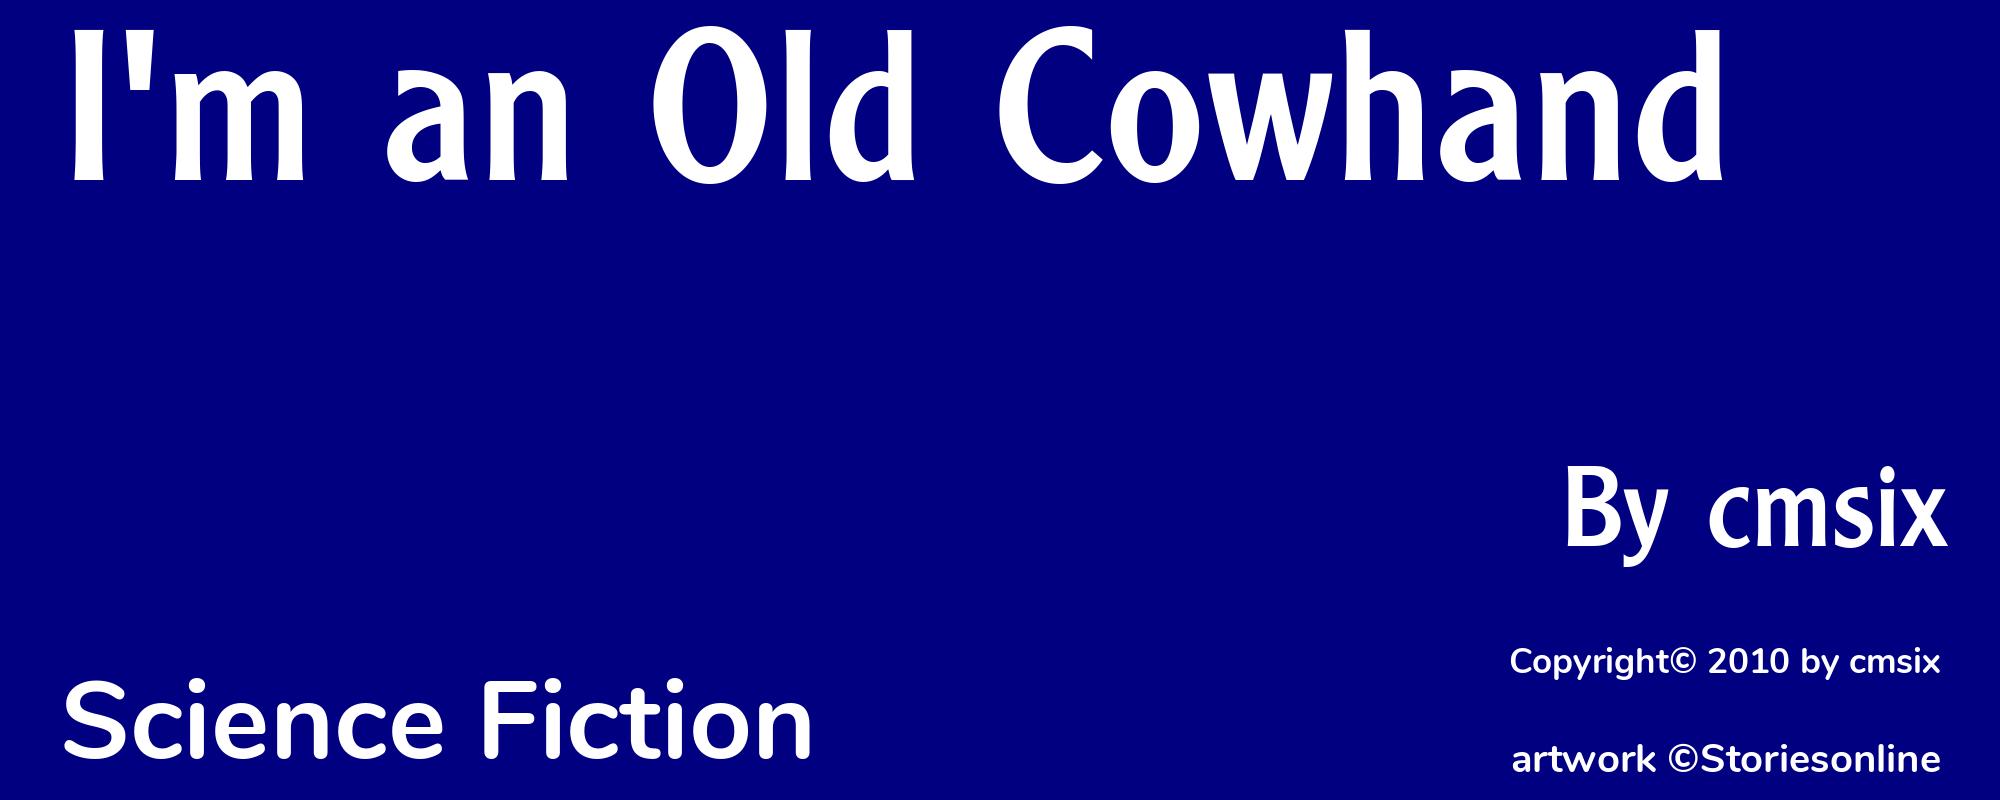 I'm an Old Cowhand - Cover